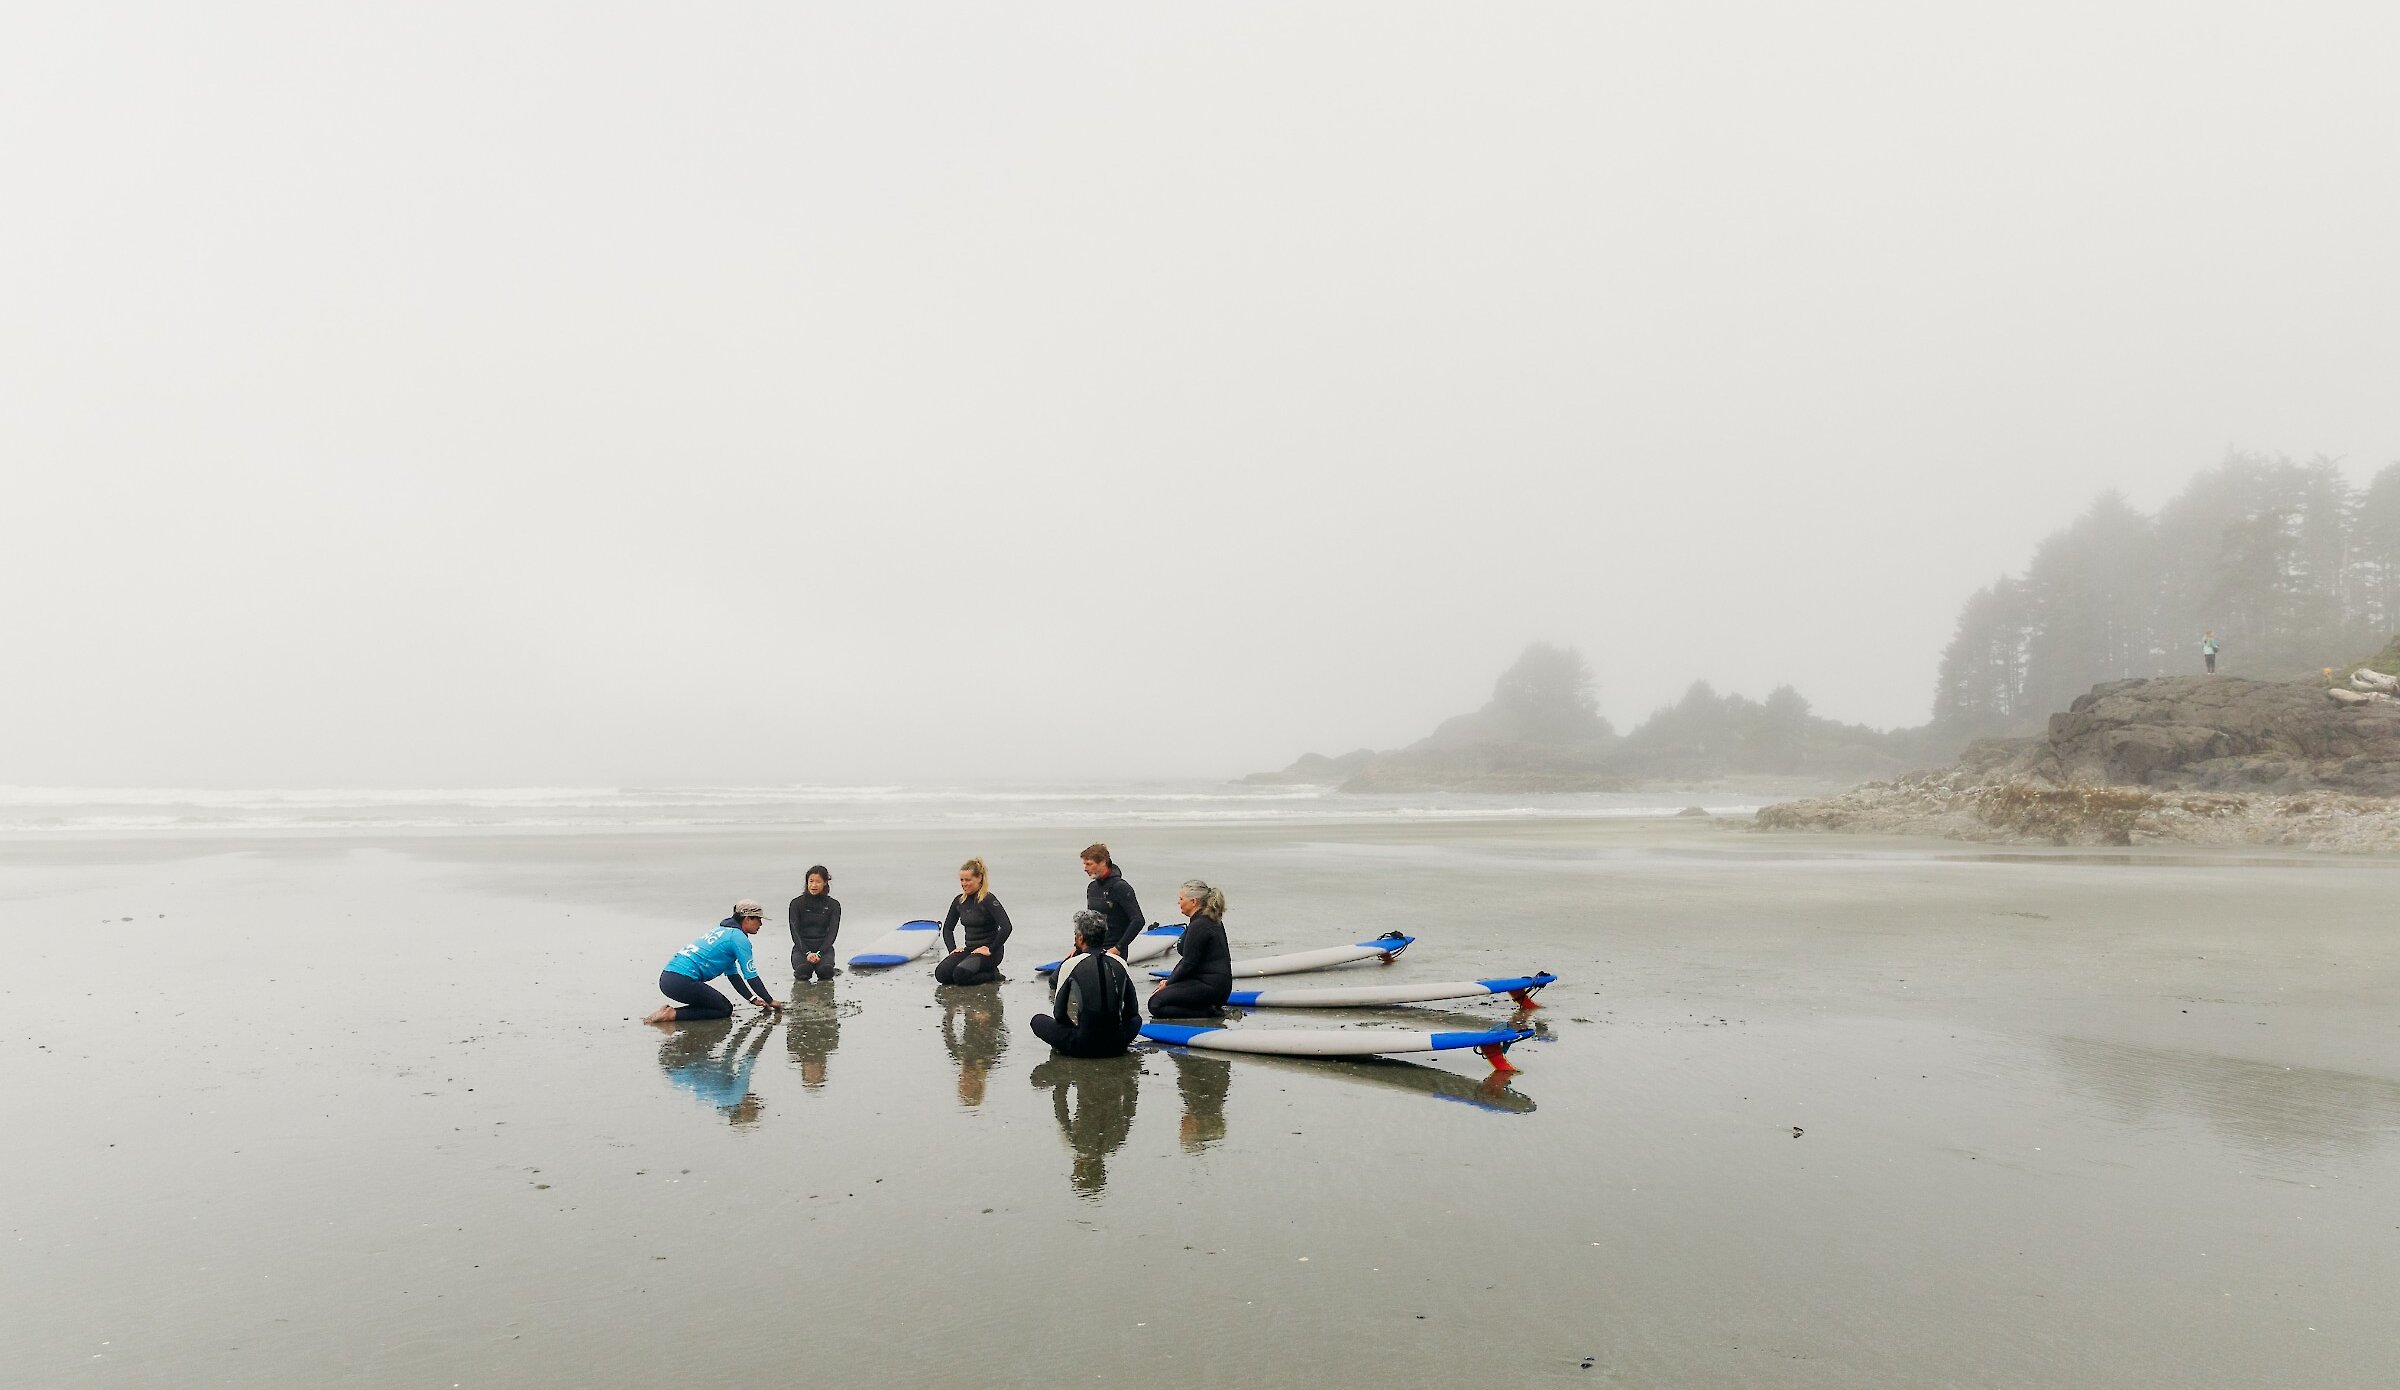 People learning to surf on a rainy beach